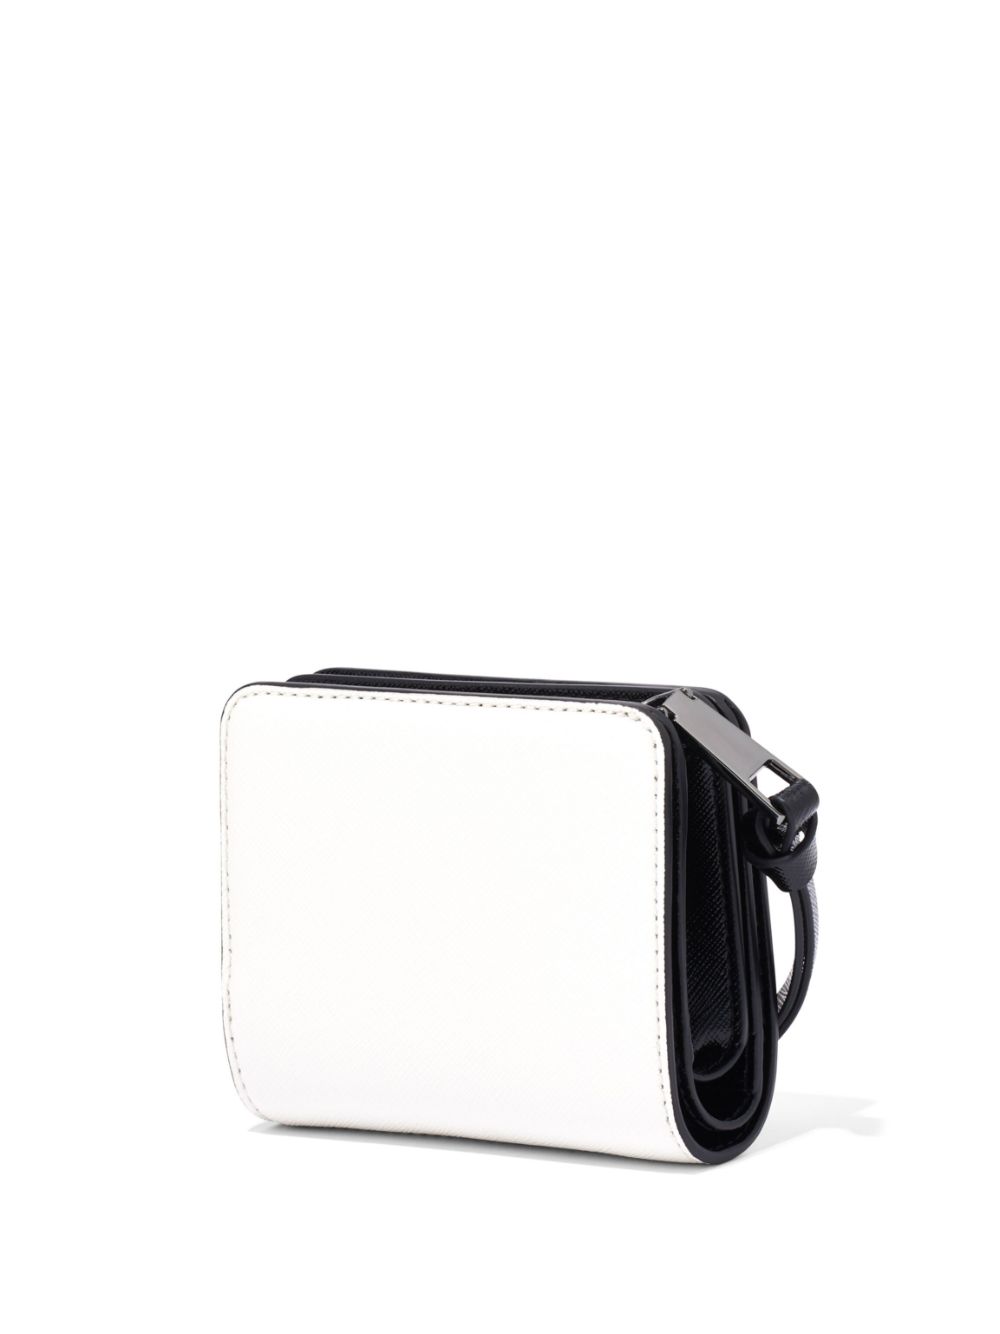 MARC JACOBS MINI COMPACT LEATHER WALLET